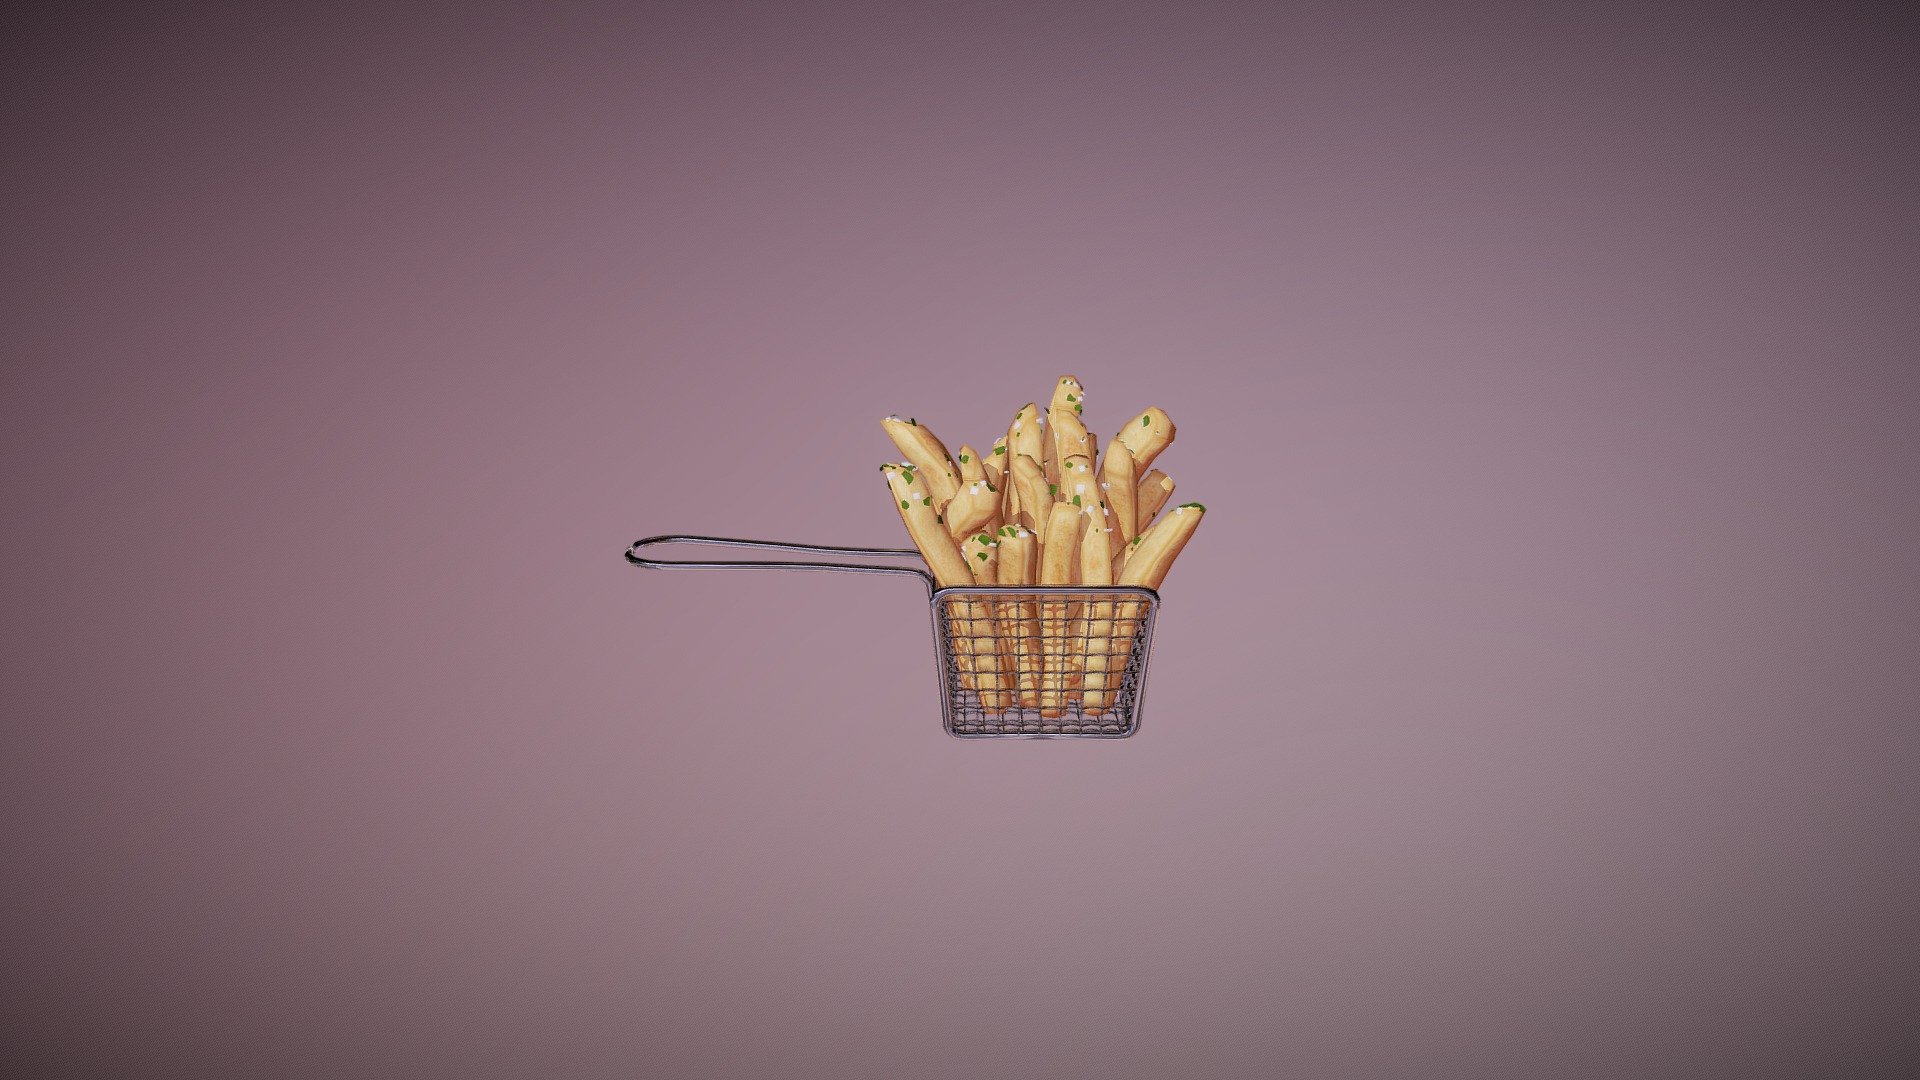 Model of delicious crisp fried potatoes with sea salt and herbs.

Modeled in Blender
Textured in Gimp - French fries / Chips - 3D model by OCBacon 3d model